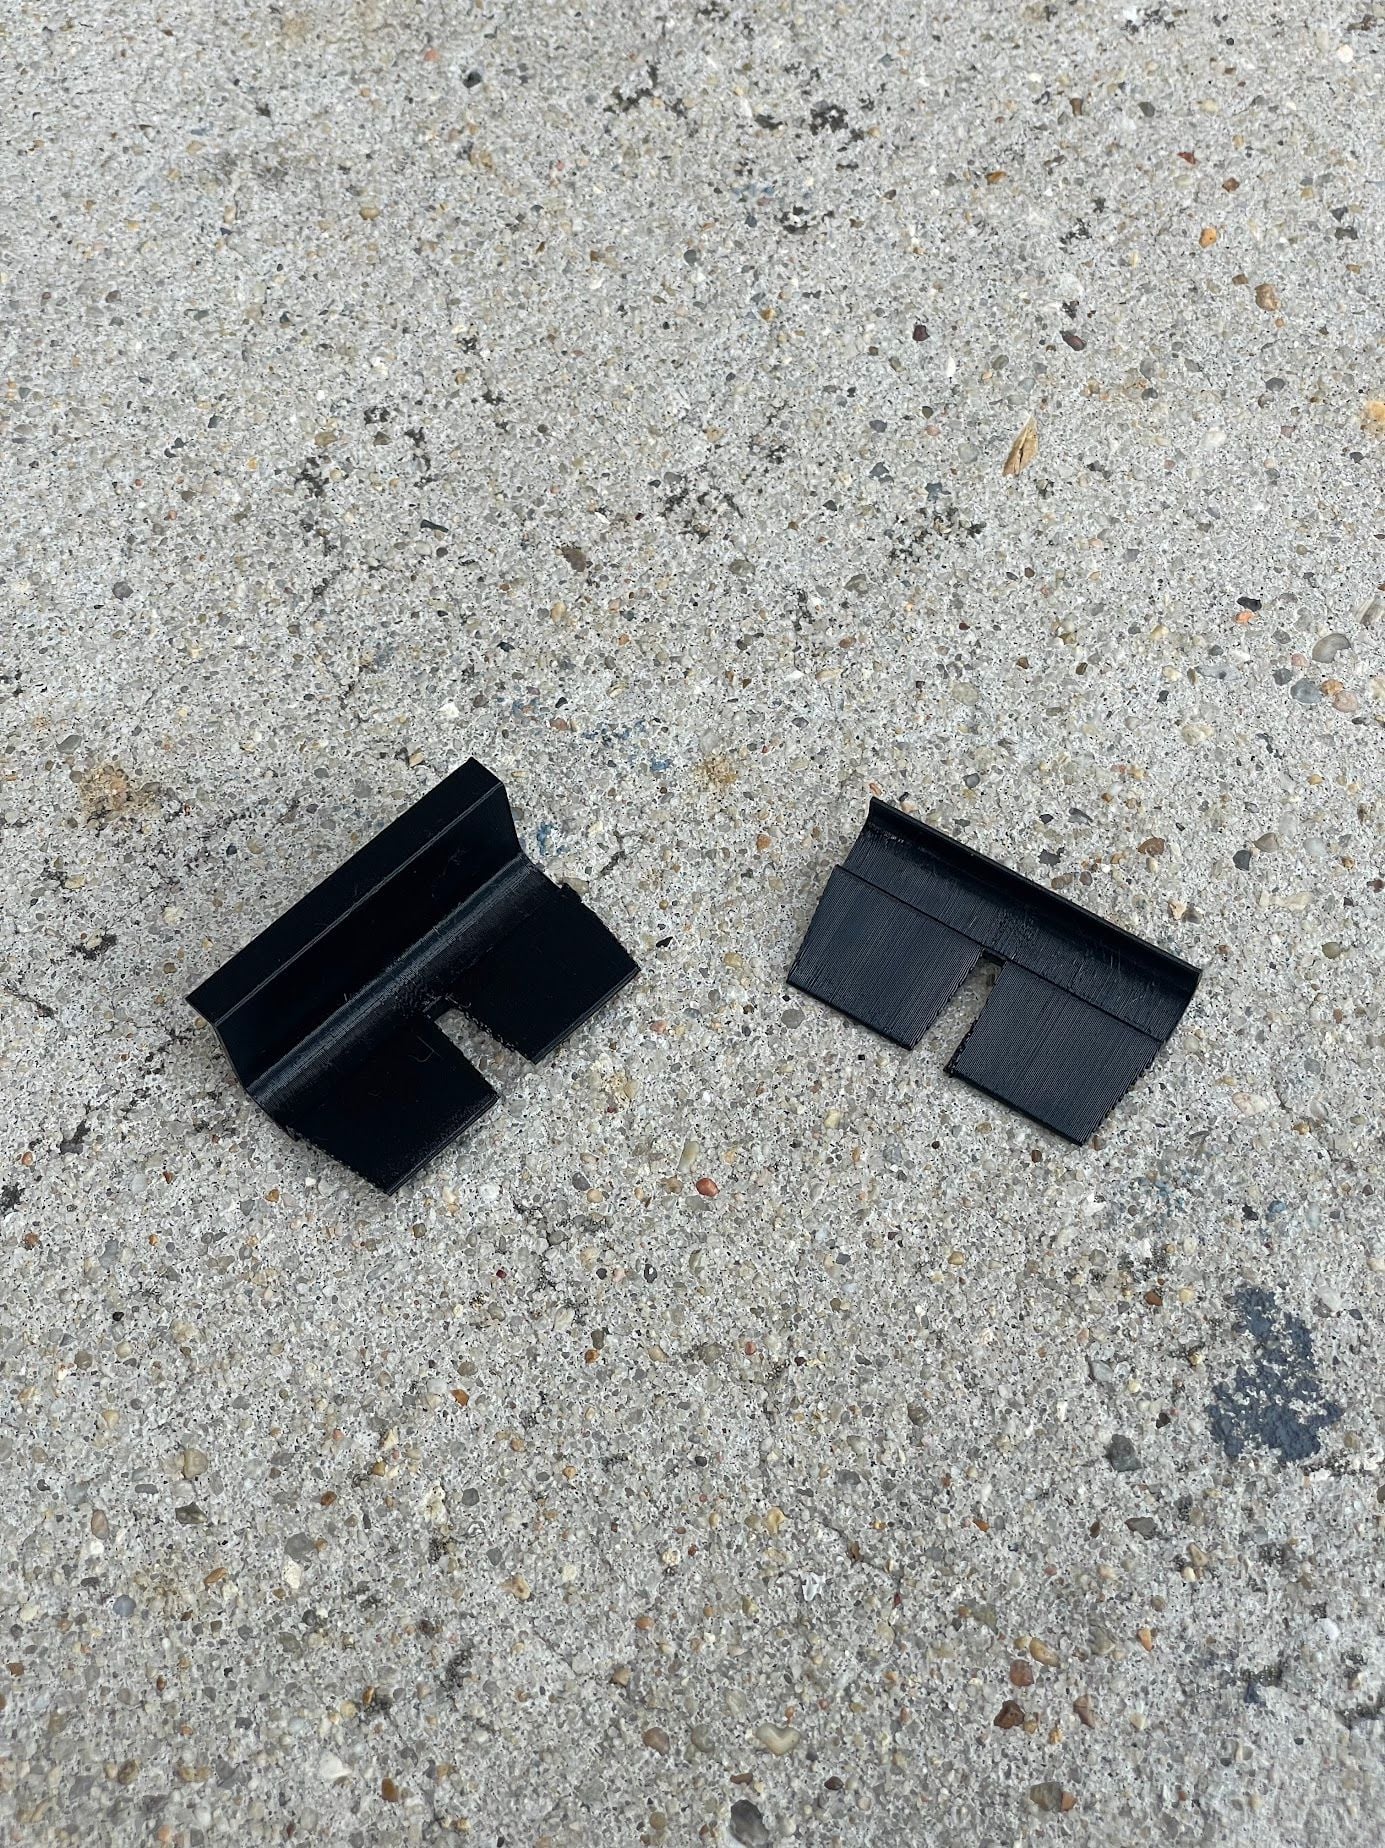 Miscellaneous - 3D Printed 93-02 Firebird/Camaro T-Top End Cap Trim Pieces - New - -1 to 2024  All Models - Metairie, LA 70005, United States